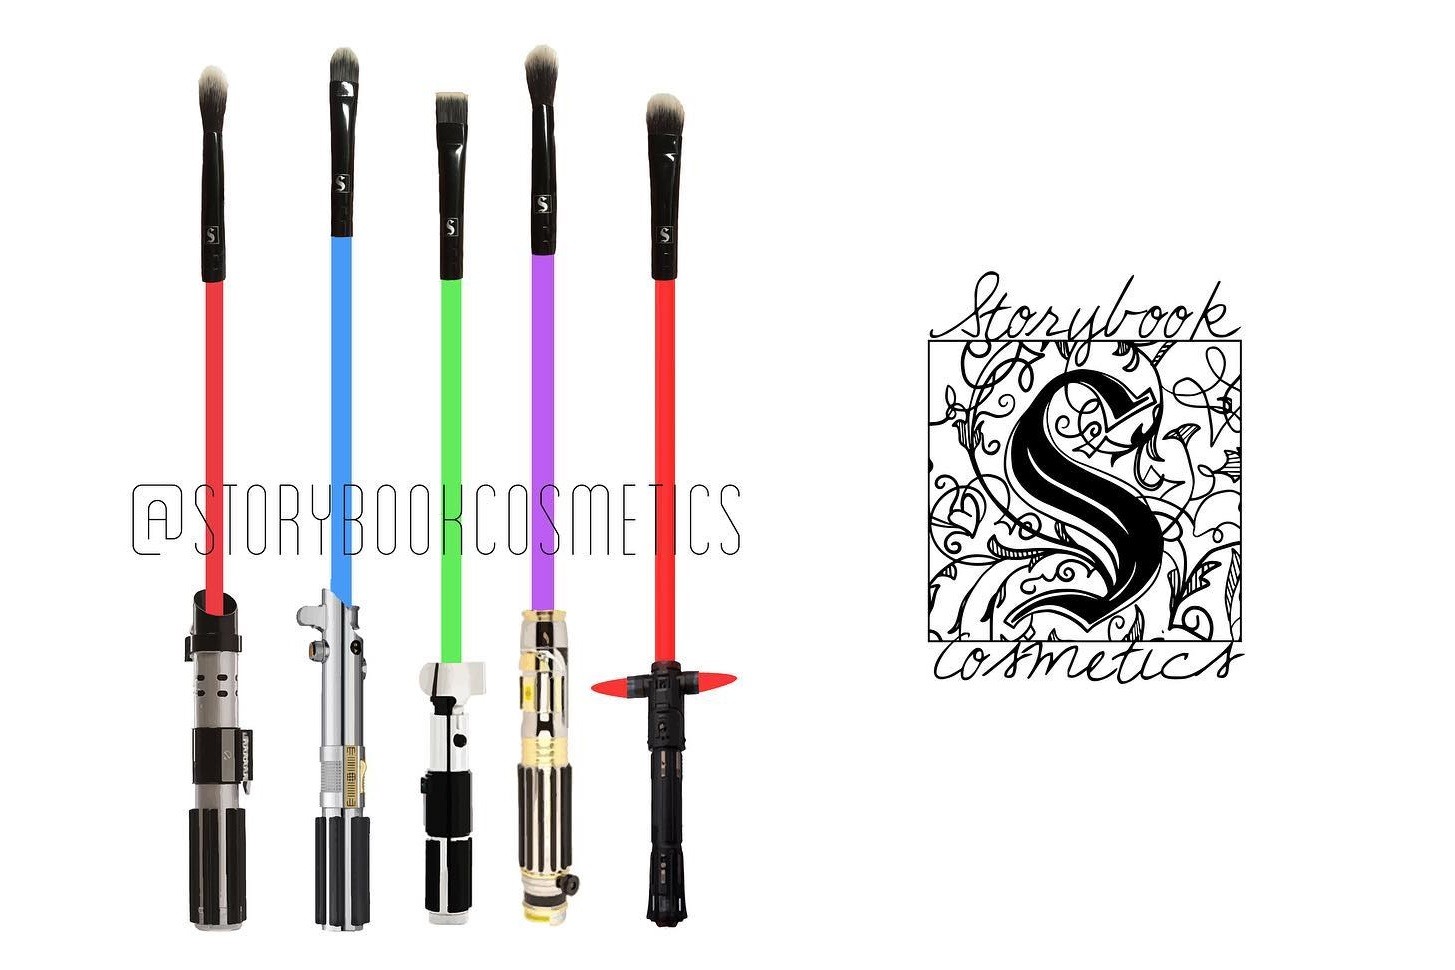 Lightsaber make-up brush concept by Storybook Cosmetics